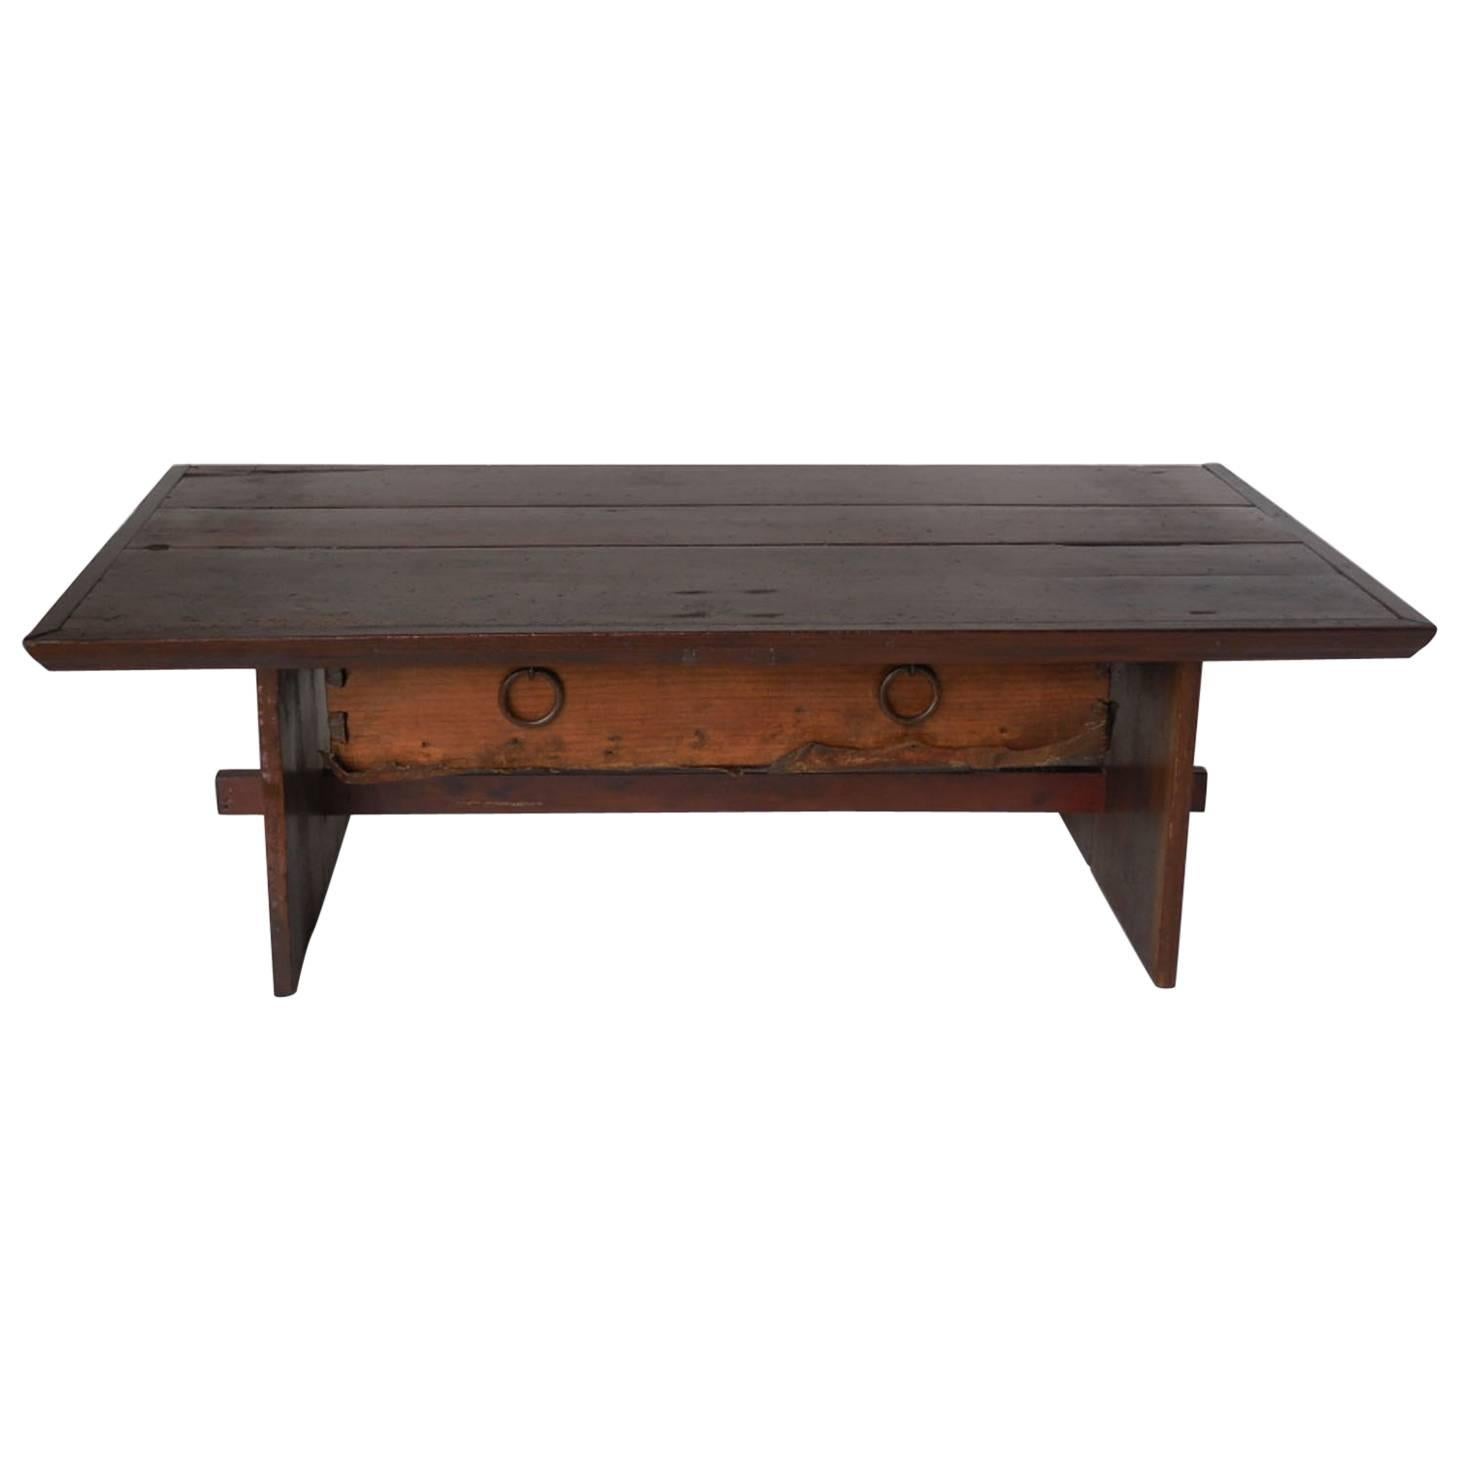 Rustic Coffee Table with Leather Bottom Drawer